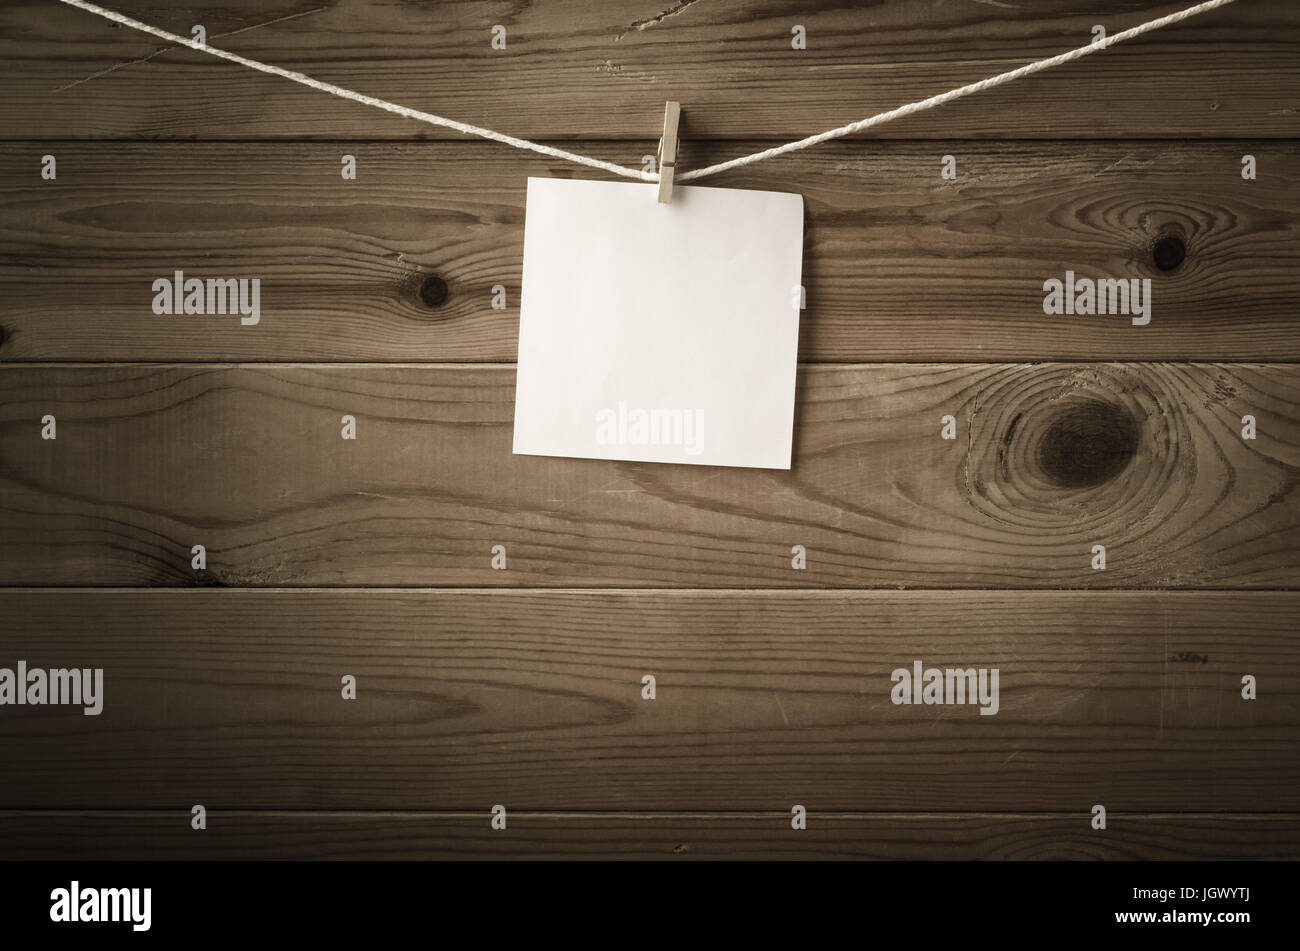 One individual square of note paper, pegged to a string washing line, with wood plank fence in the background.  Low saturation and vignette gives a re Stock Photo